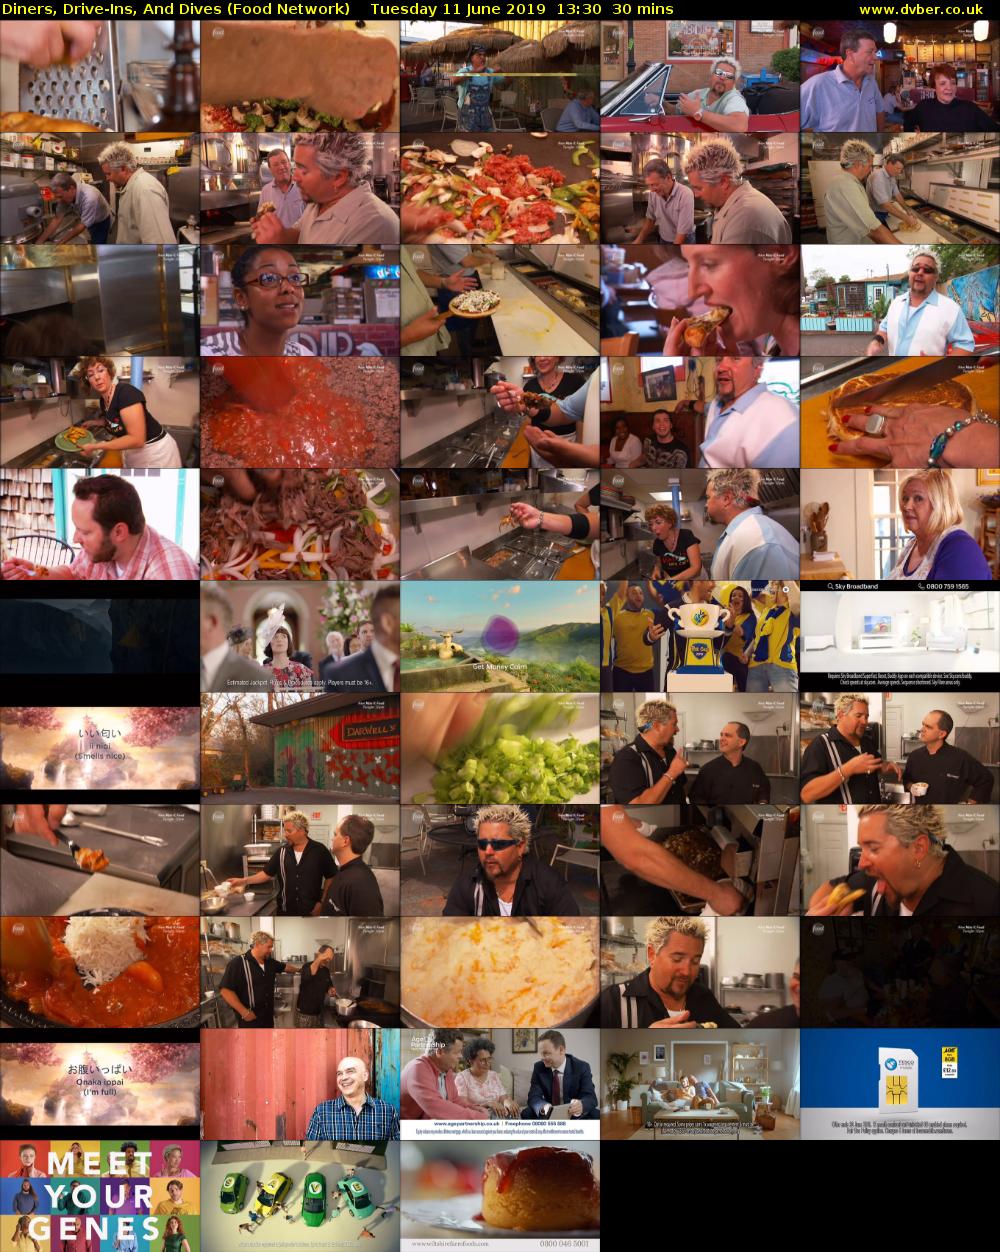 Diners, Drive-Ins, And Dives (Food Network) Tuesday 11 June 2019 13:30 - 14:00